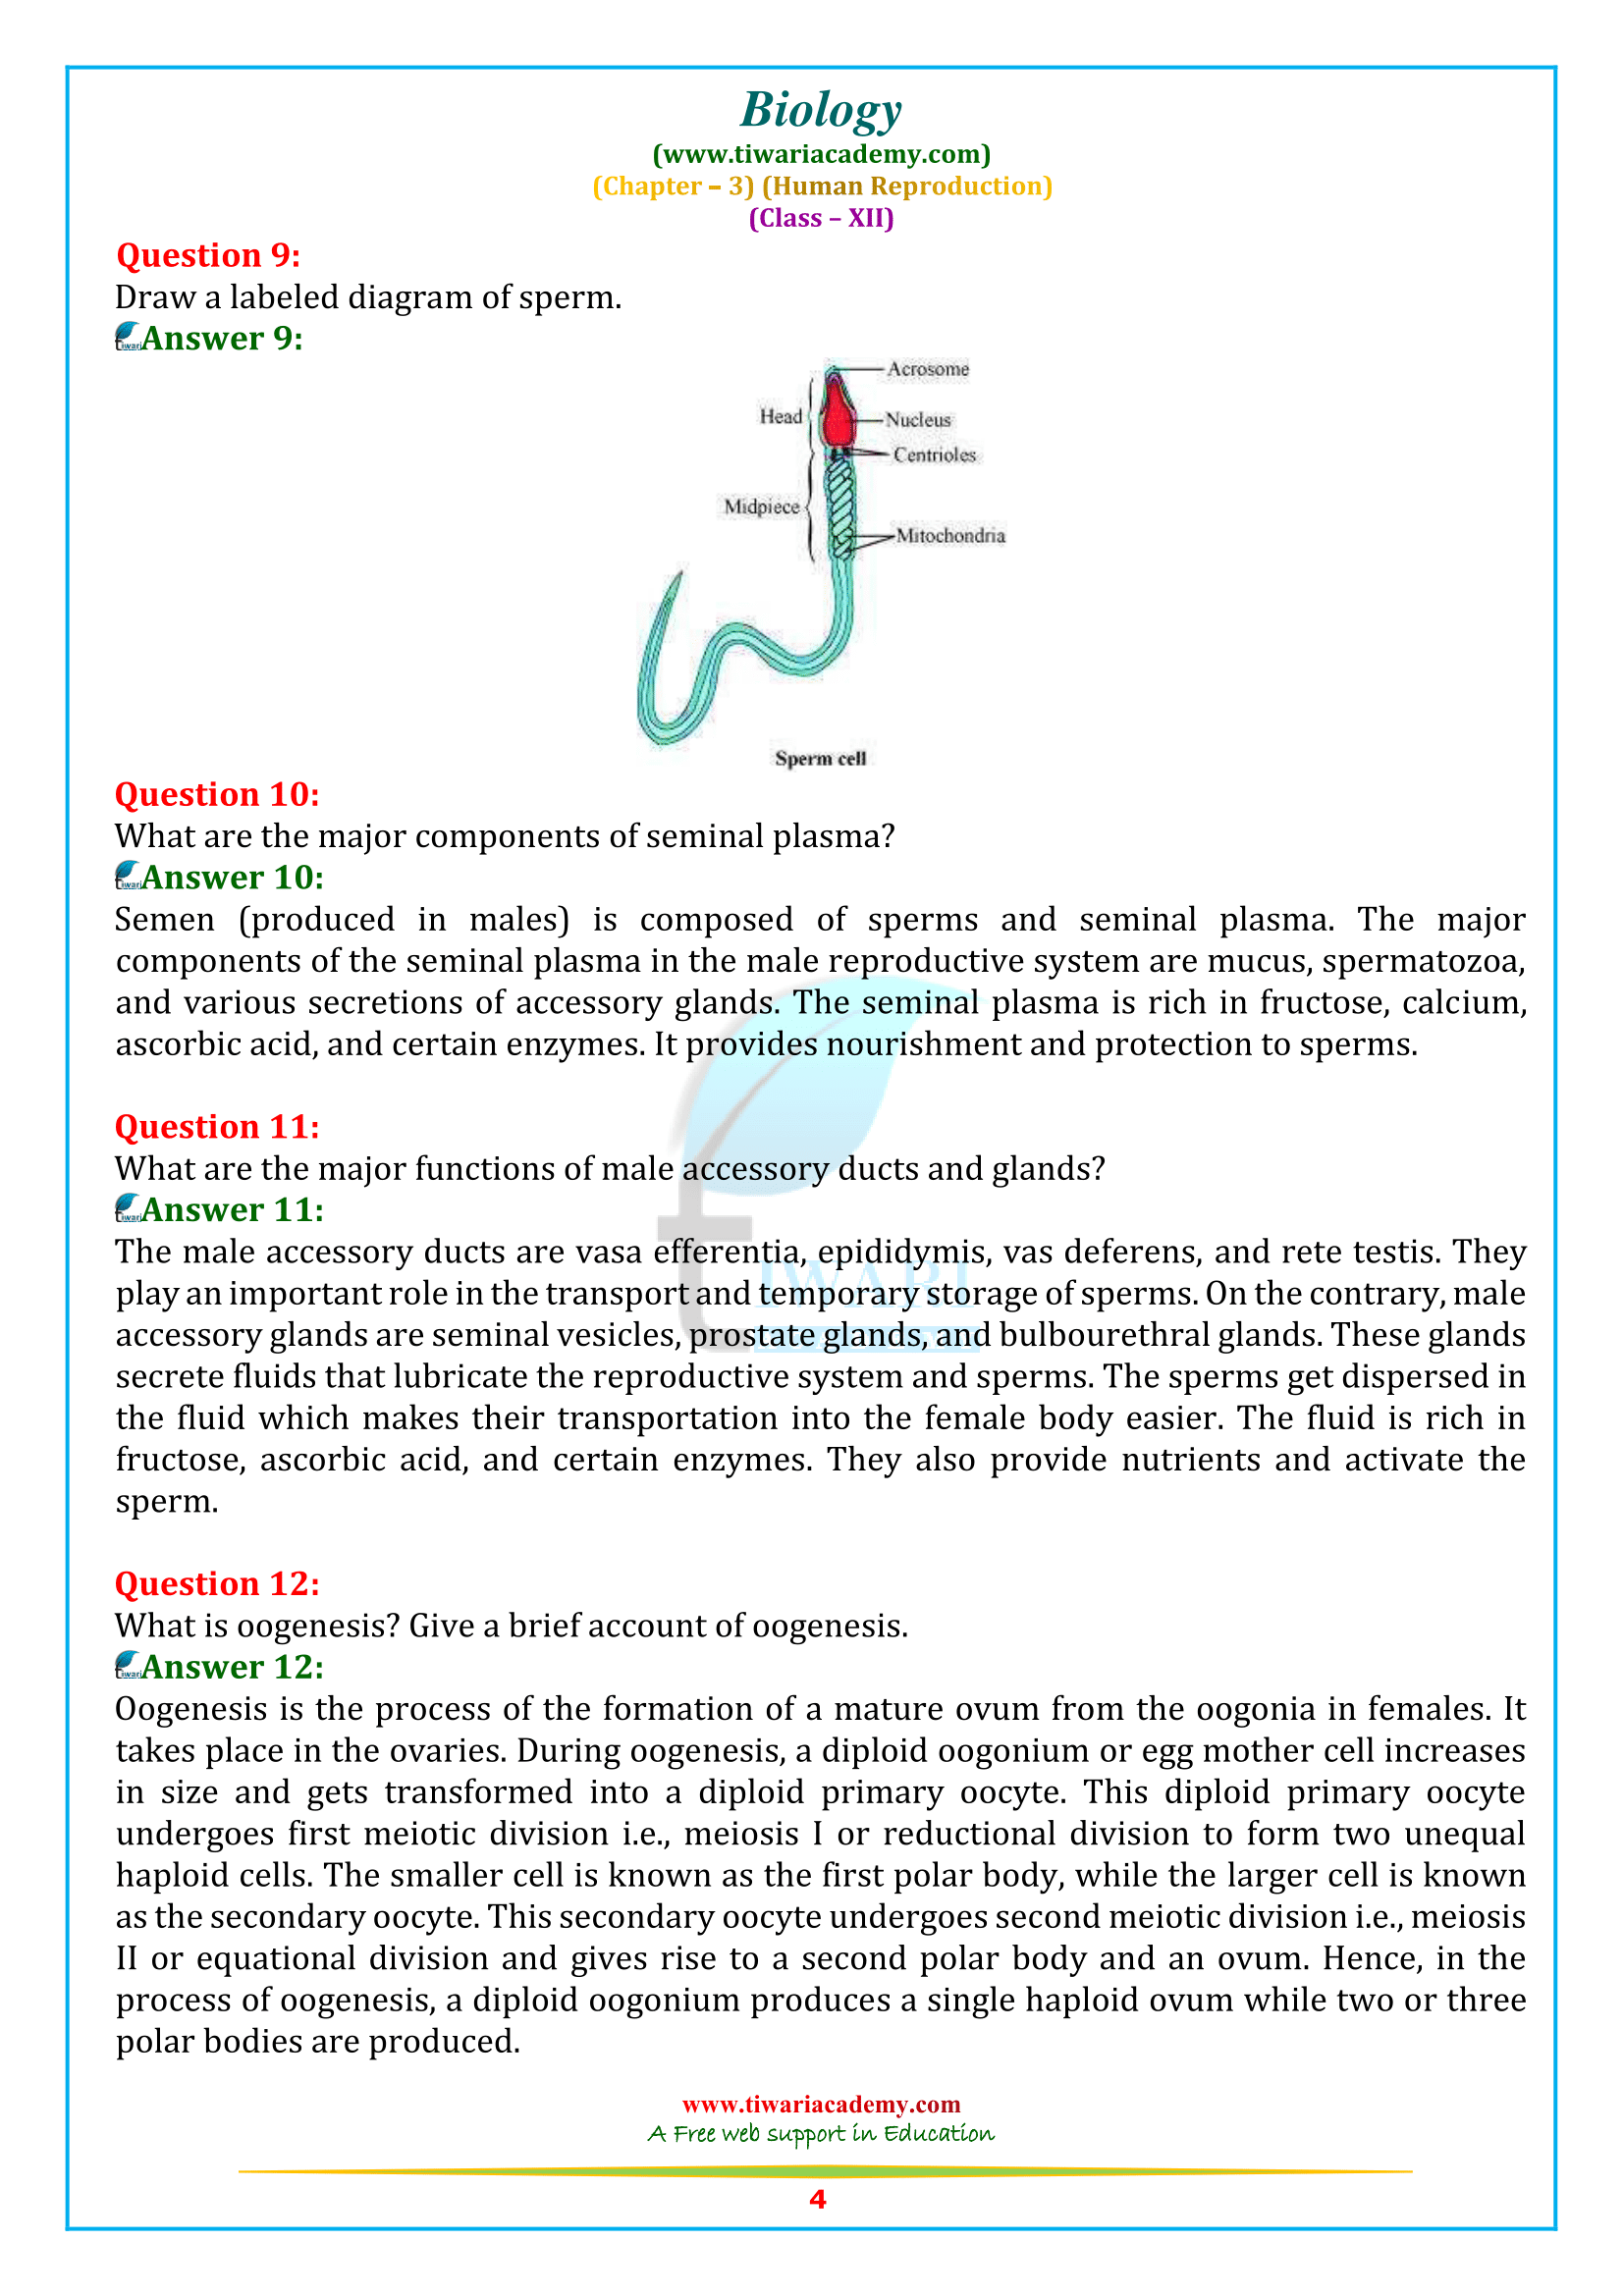 NCERT Solutions for Class 12 Biology Chapter 3 in pdf